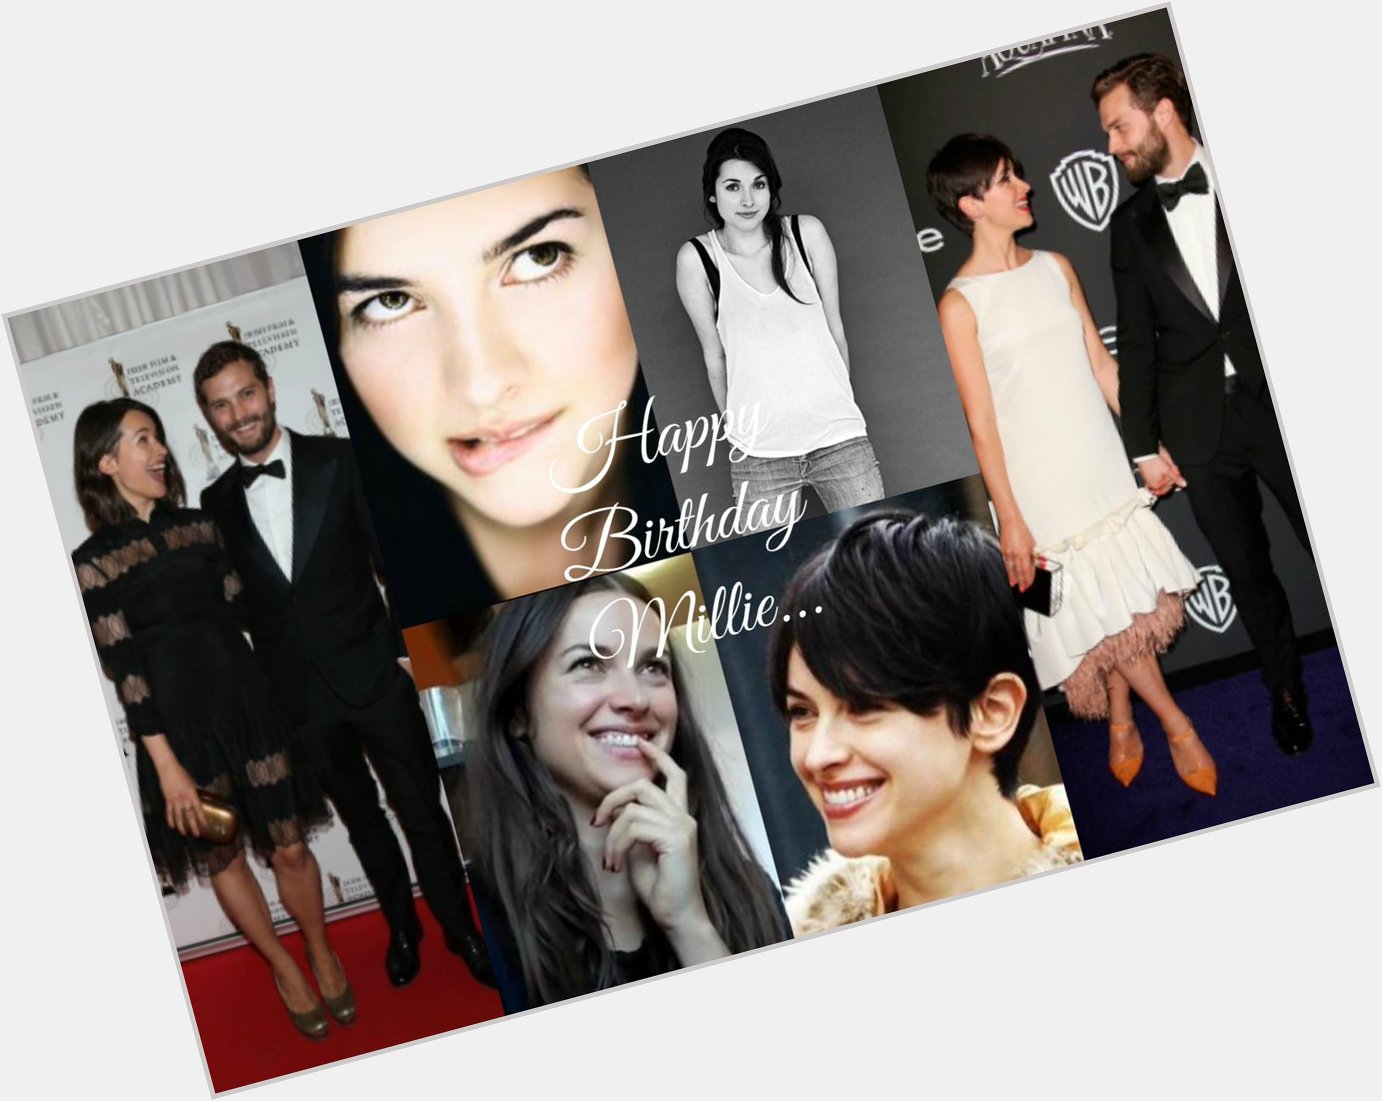 After midnight! Happy Birthday to the beautiful and amazing Amelia Warner        